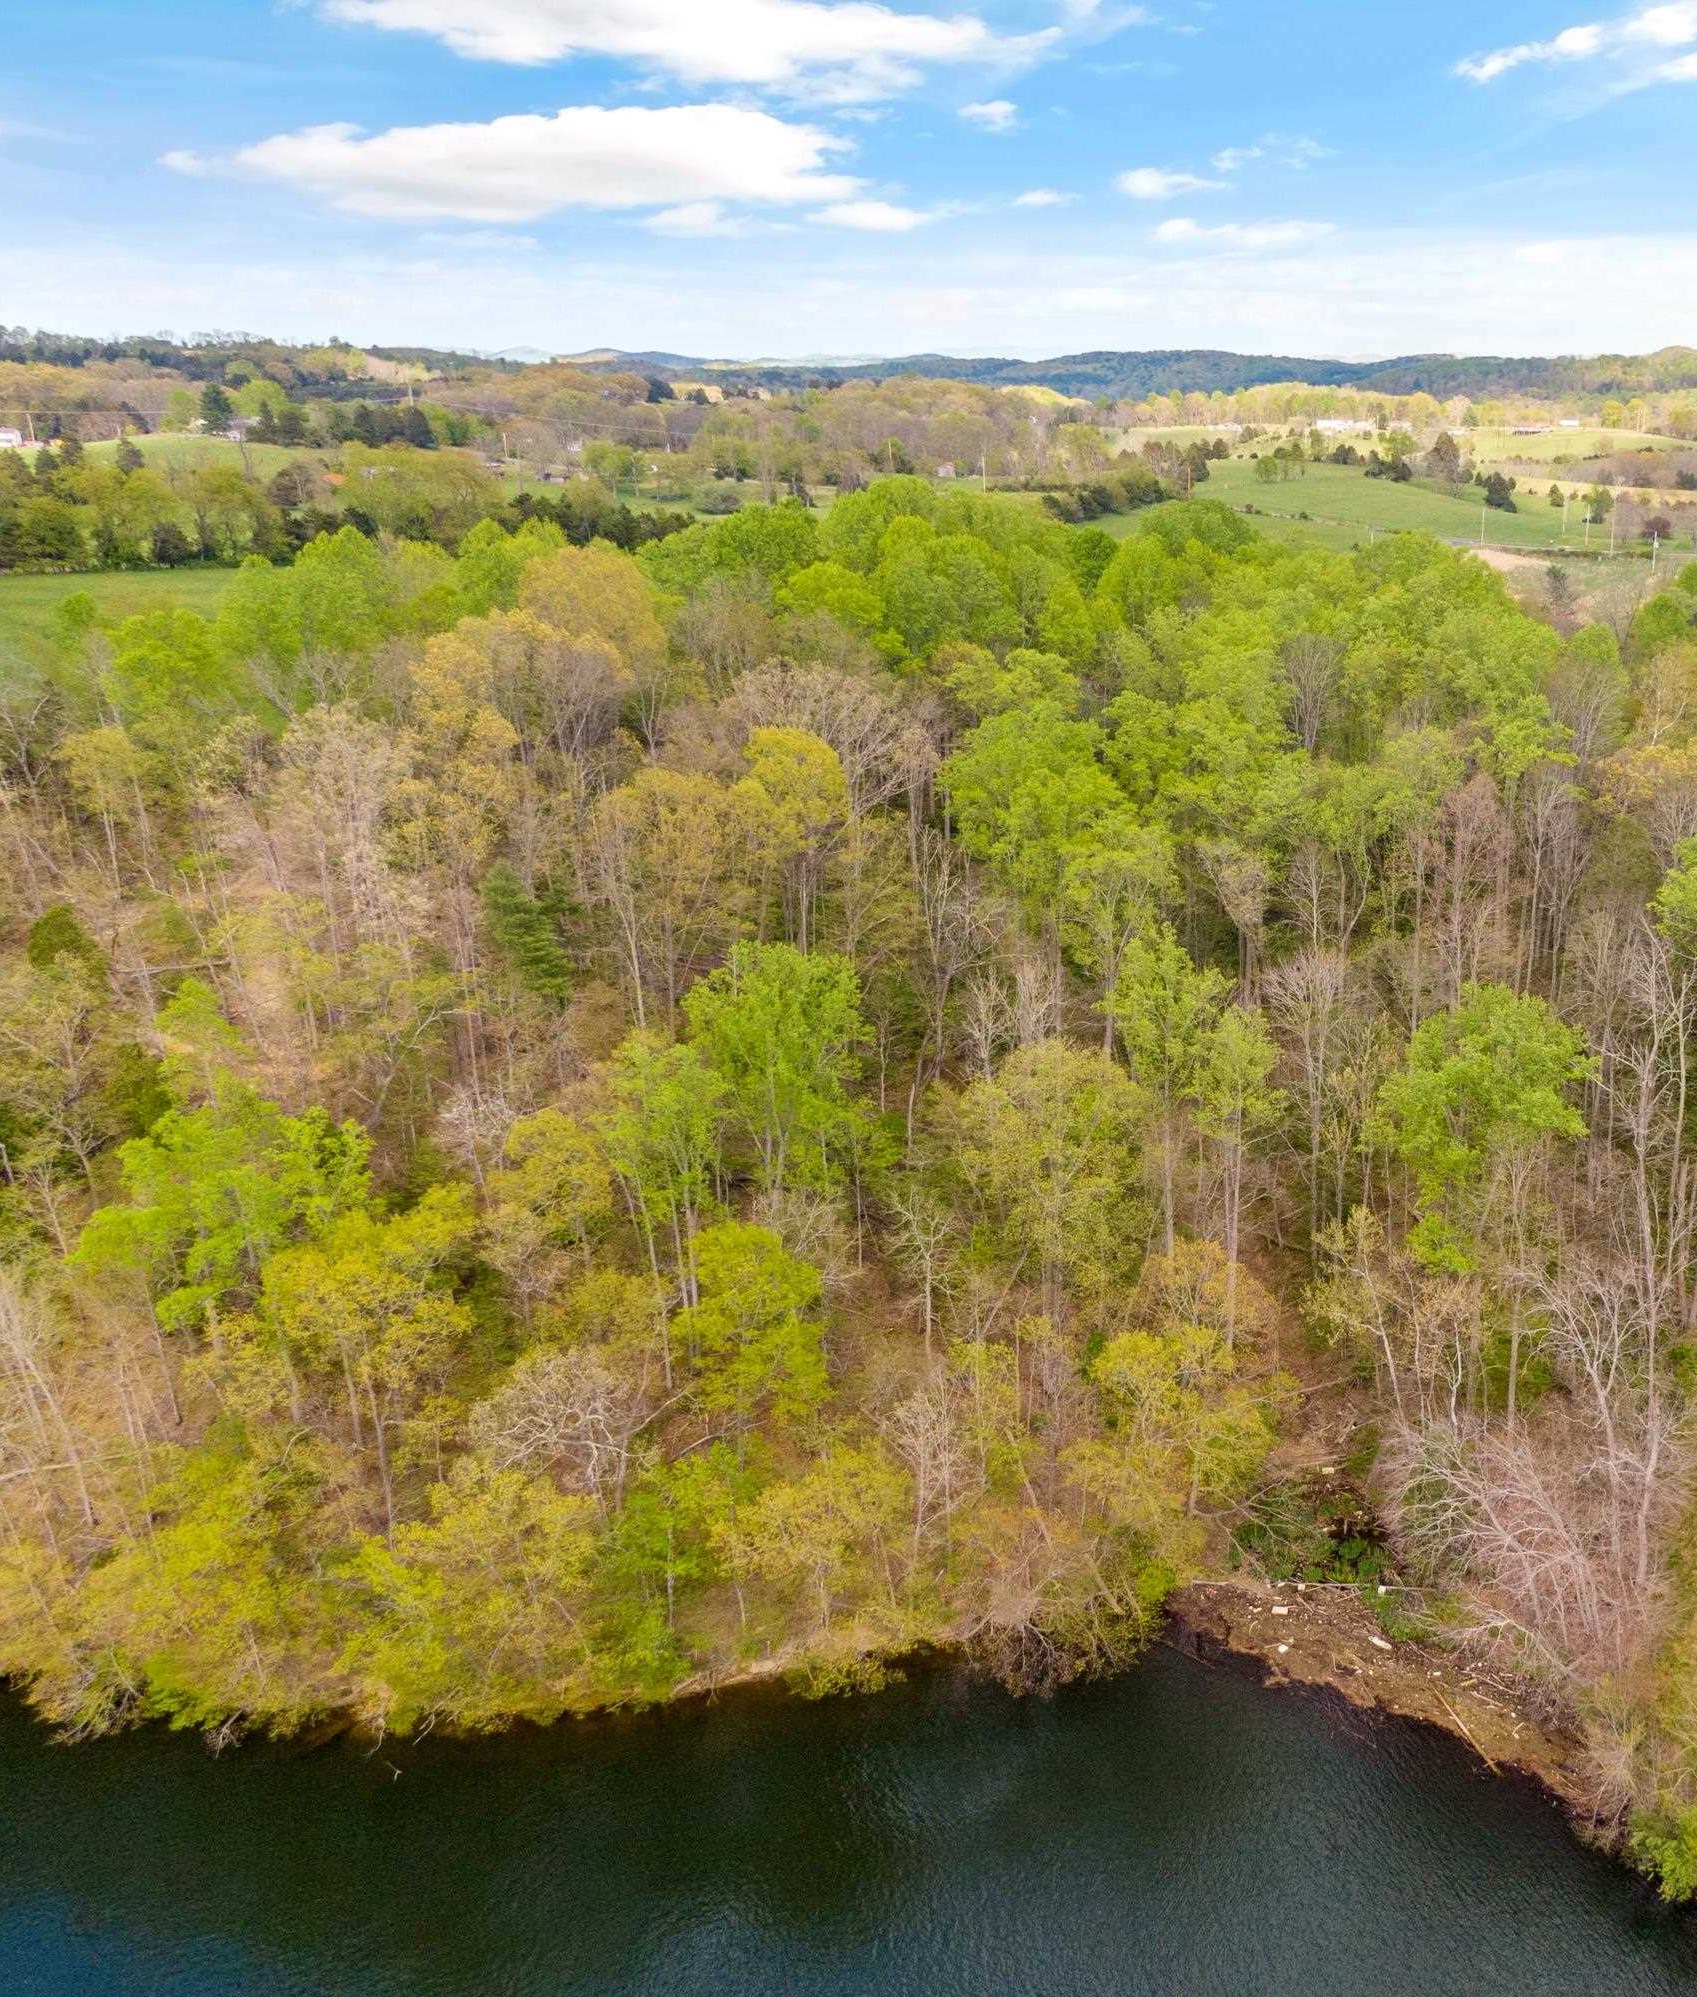 Wonderful opportunity to build your dream home on a 2.51 acre Claytor Lake waterfront lot . Approximately 285 ft of shoreline in the Peak Creek area of the lake. Nicely paved road all the way to the property. Very convenient to shopping, restaurants, and interstate. Septic information available.